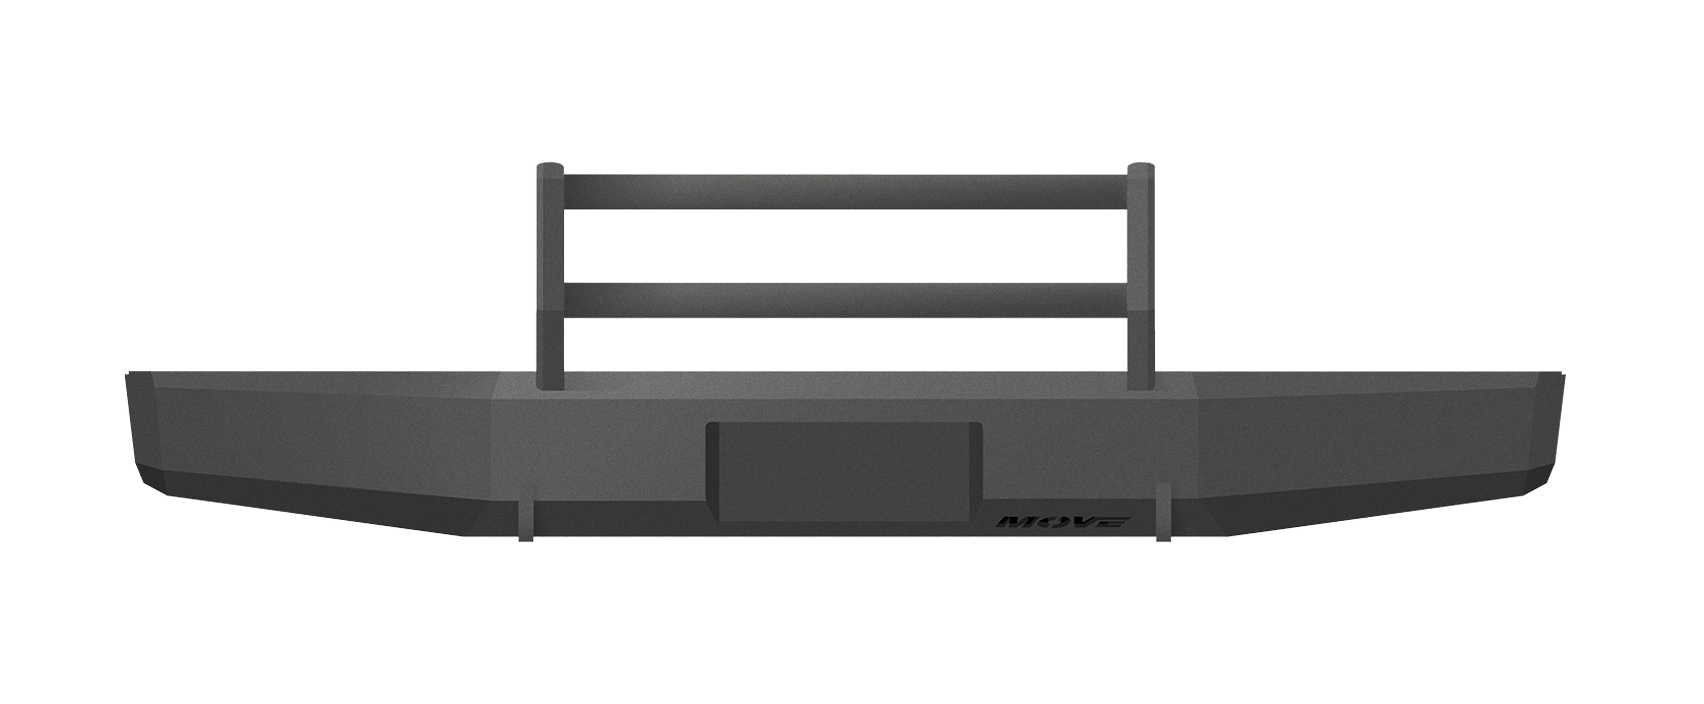 Heritage Tubular Sport Front Truck Bumper - MOVE Bumpers  | contain